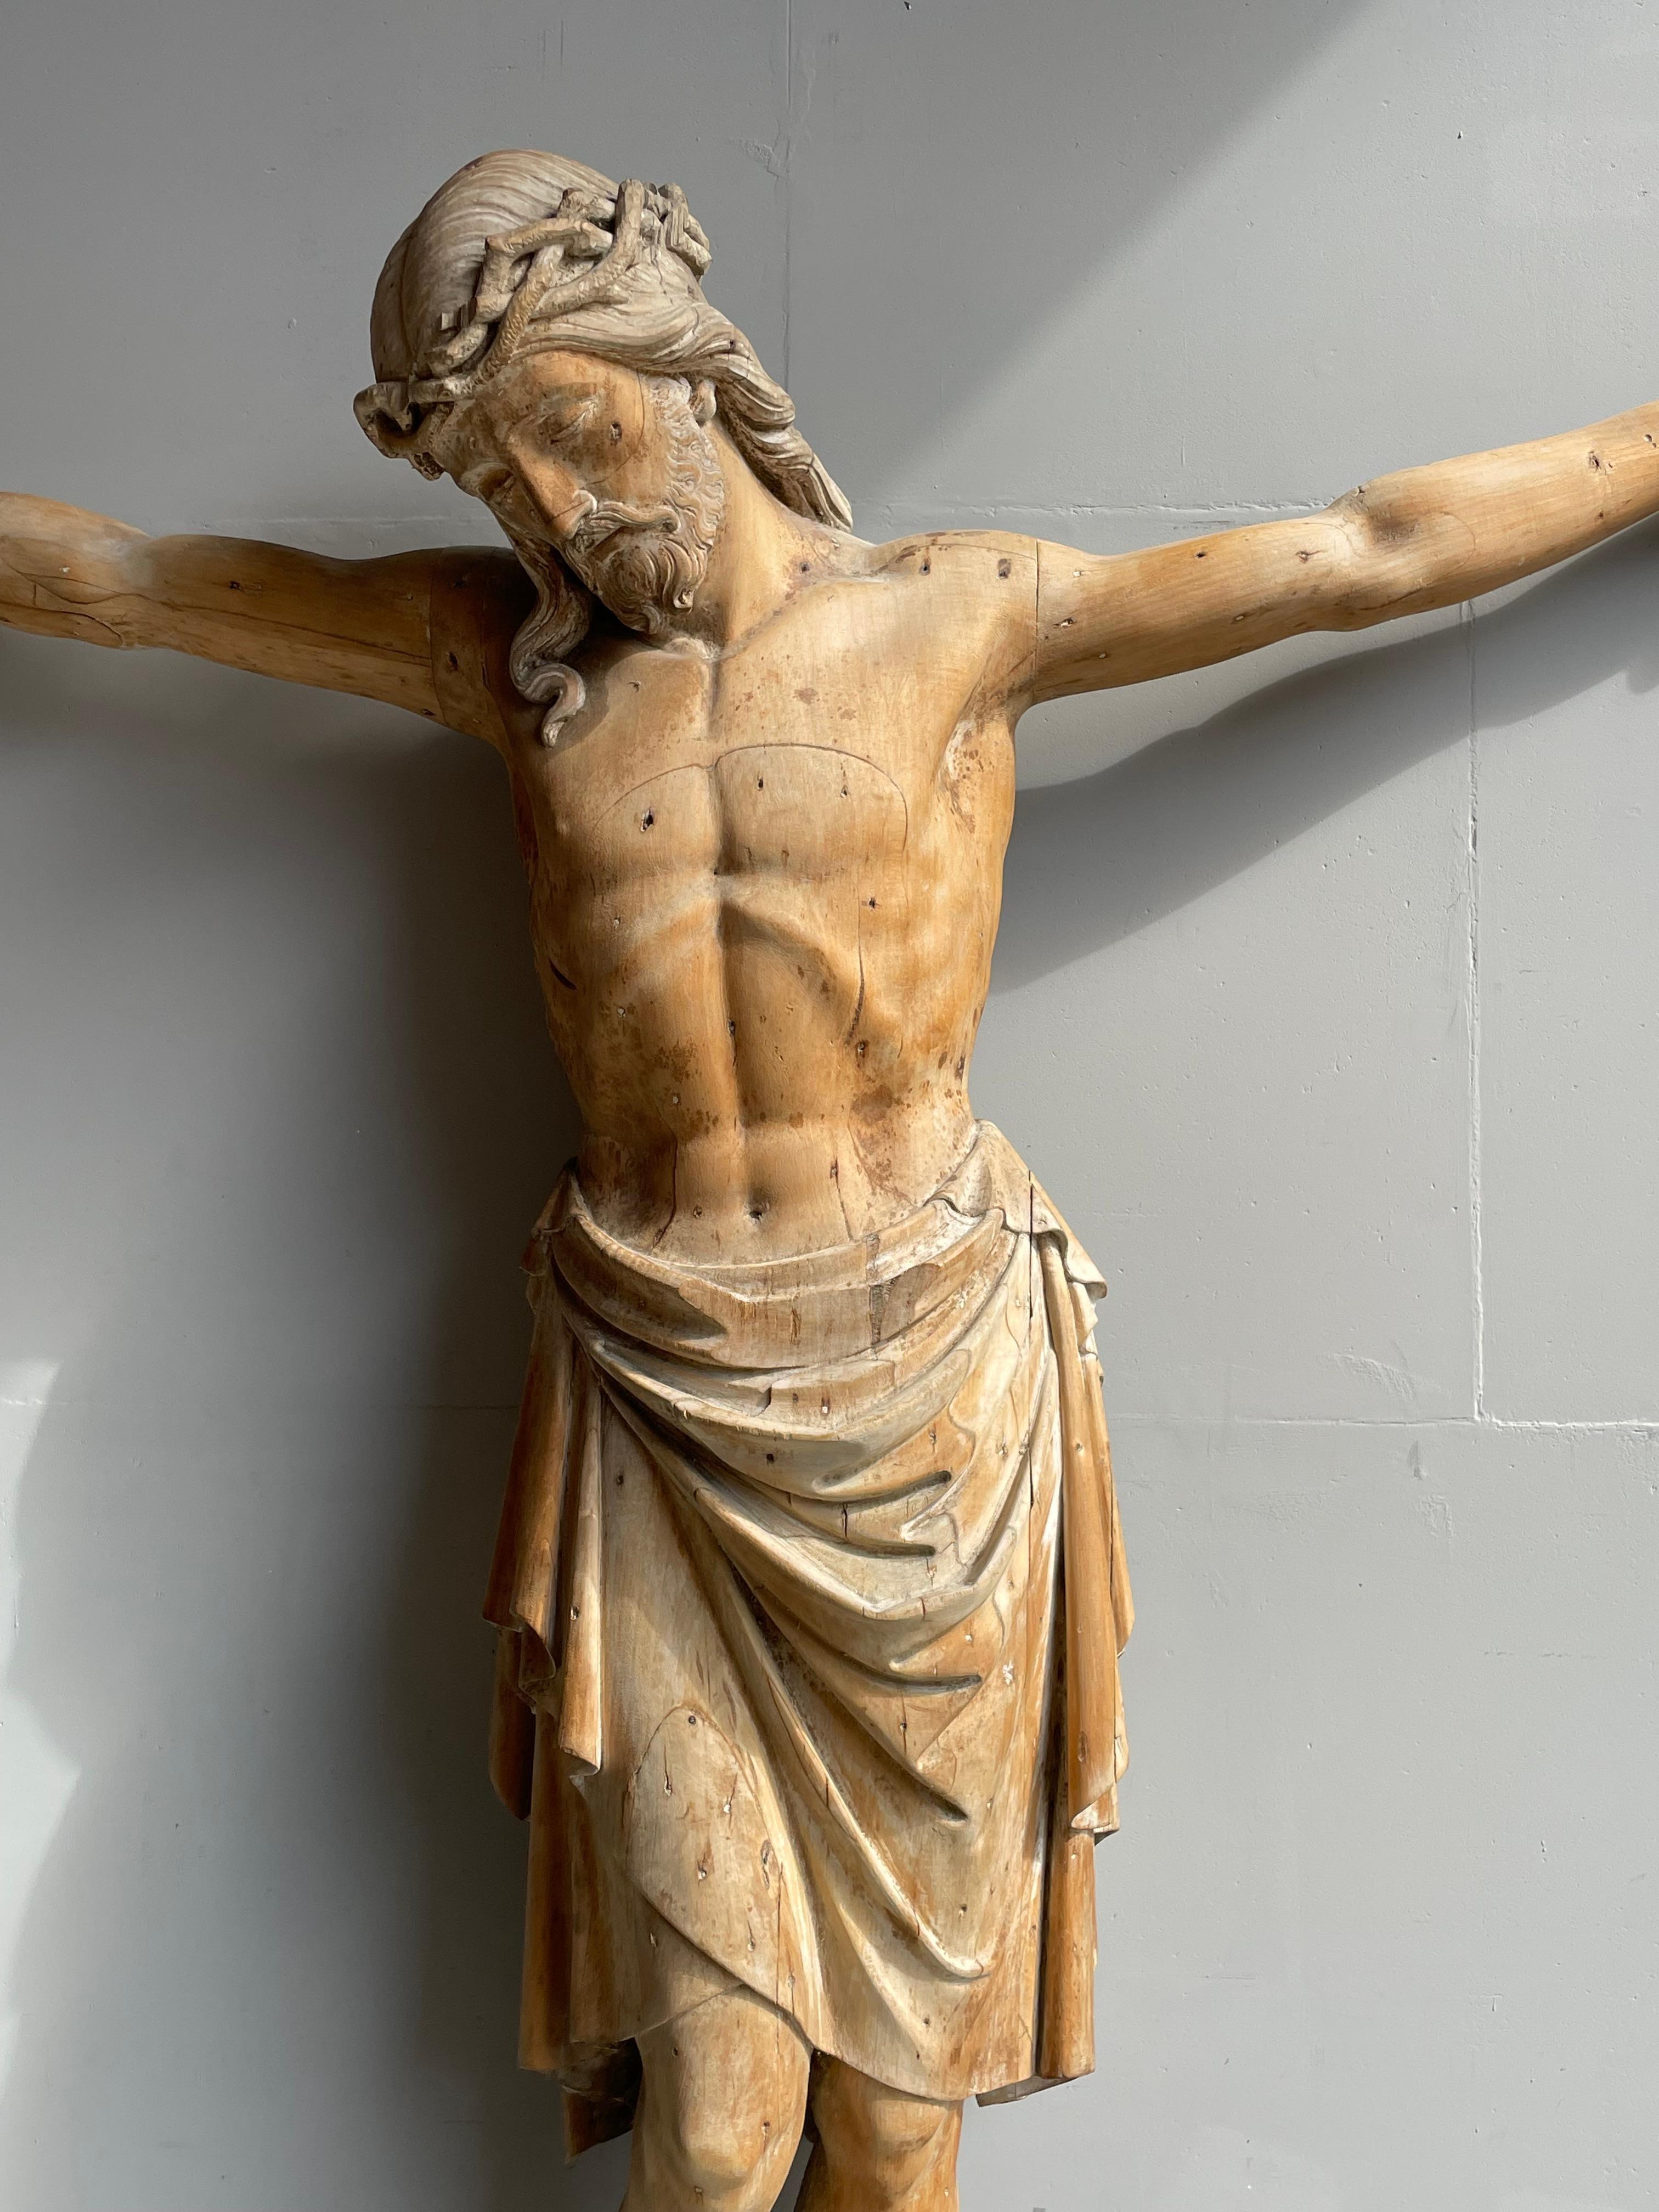 One of a kind, near-lifesize wooden corpus of Christ.

The meaning of this antique sculpture obviously needs no explanation. However, not everybody looks at the corpus of Christ with the same ideas and emotions. And each individual may also have